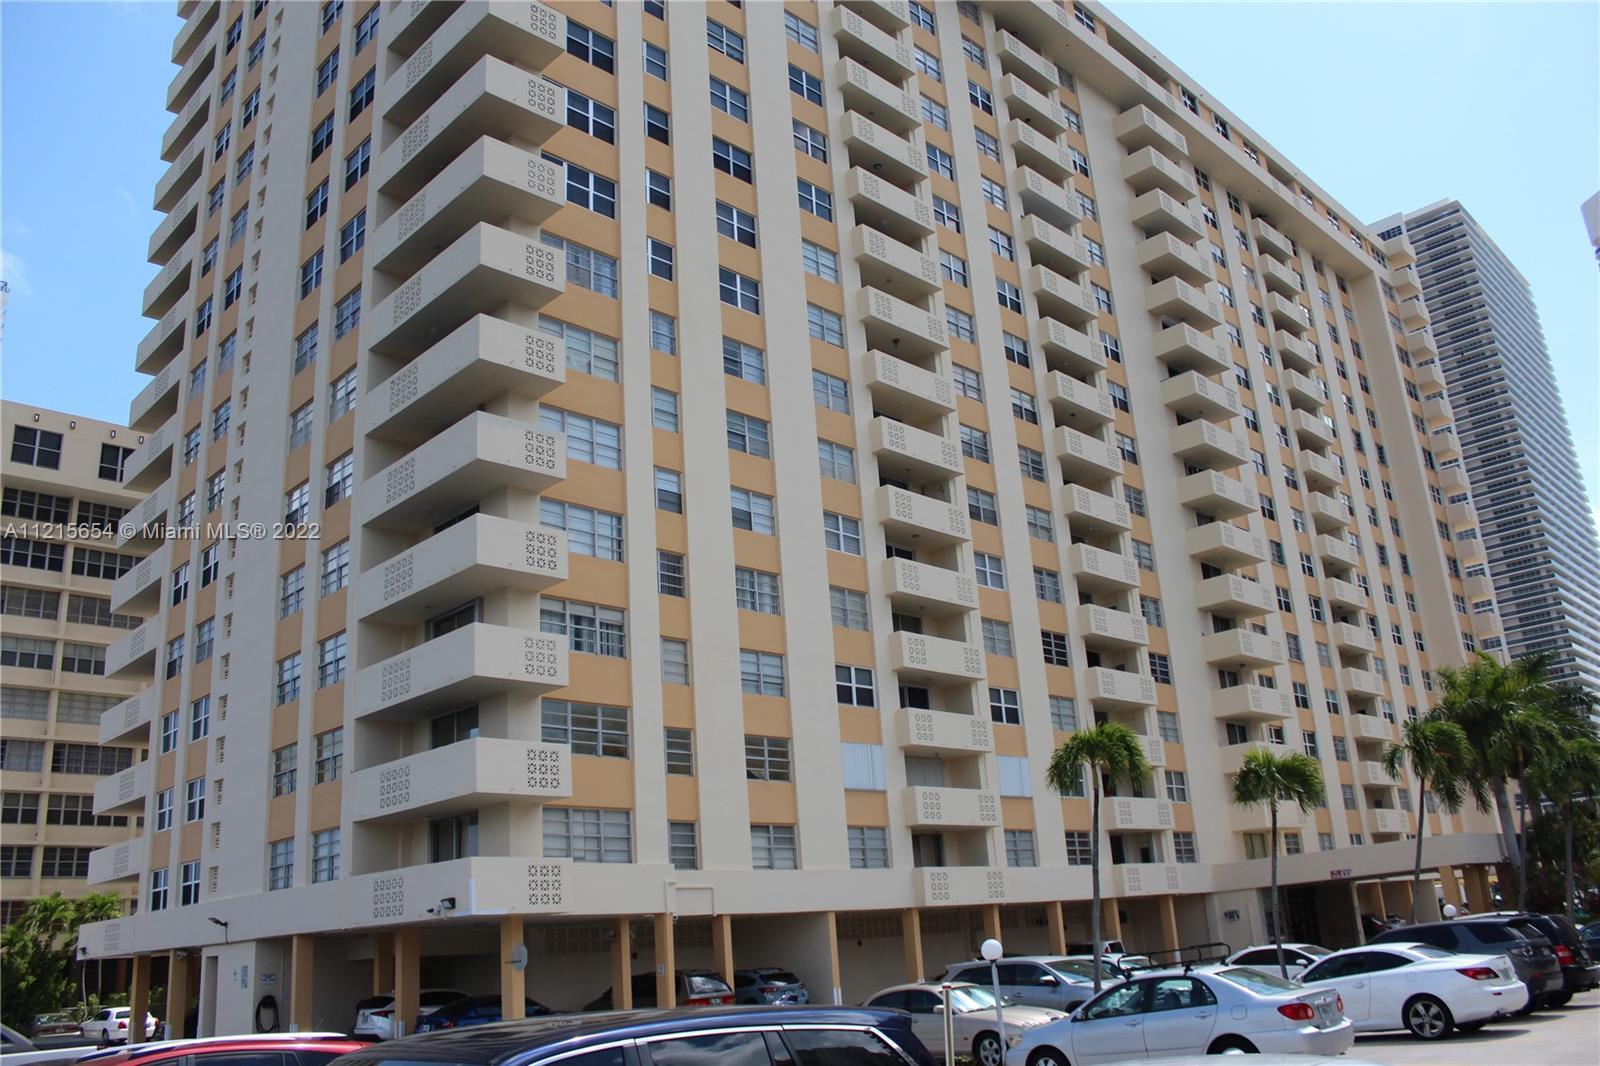 Prime location in East Hallandale just across the street from the beautiful beach. Literally steps a